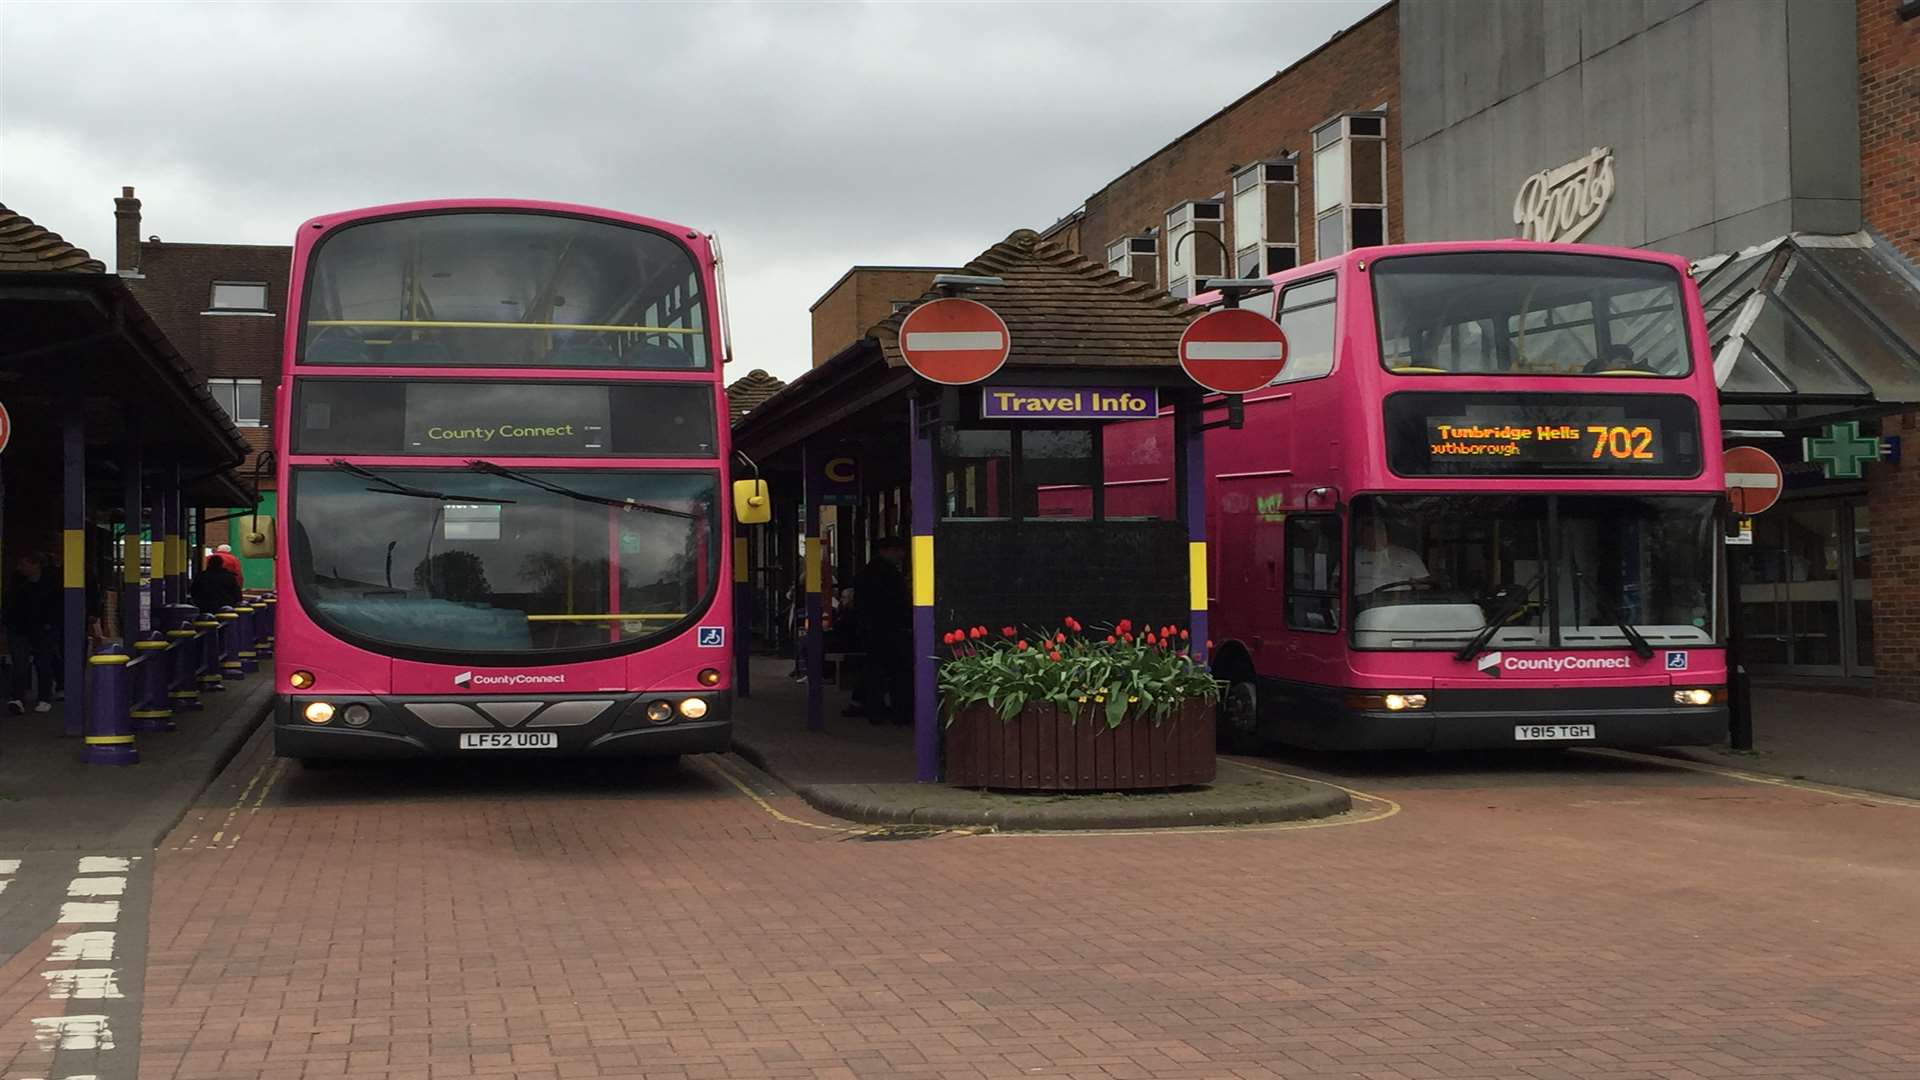 County Connect is no longer allowed to operate buses. Picture: Jordan's Buses